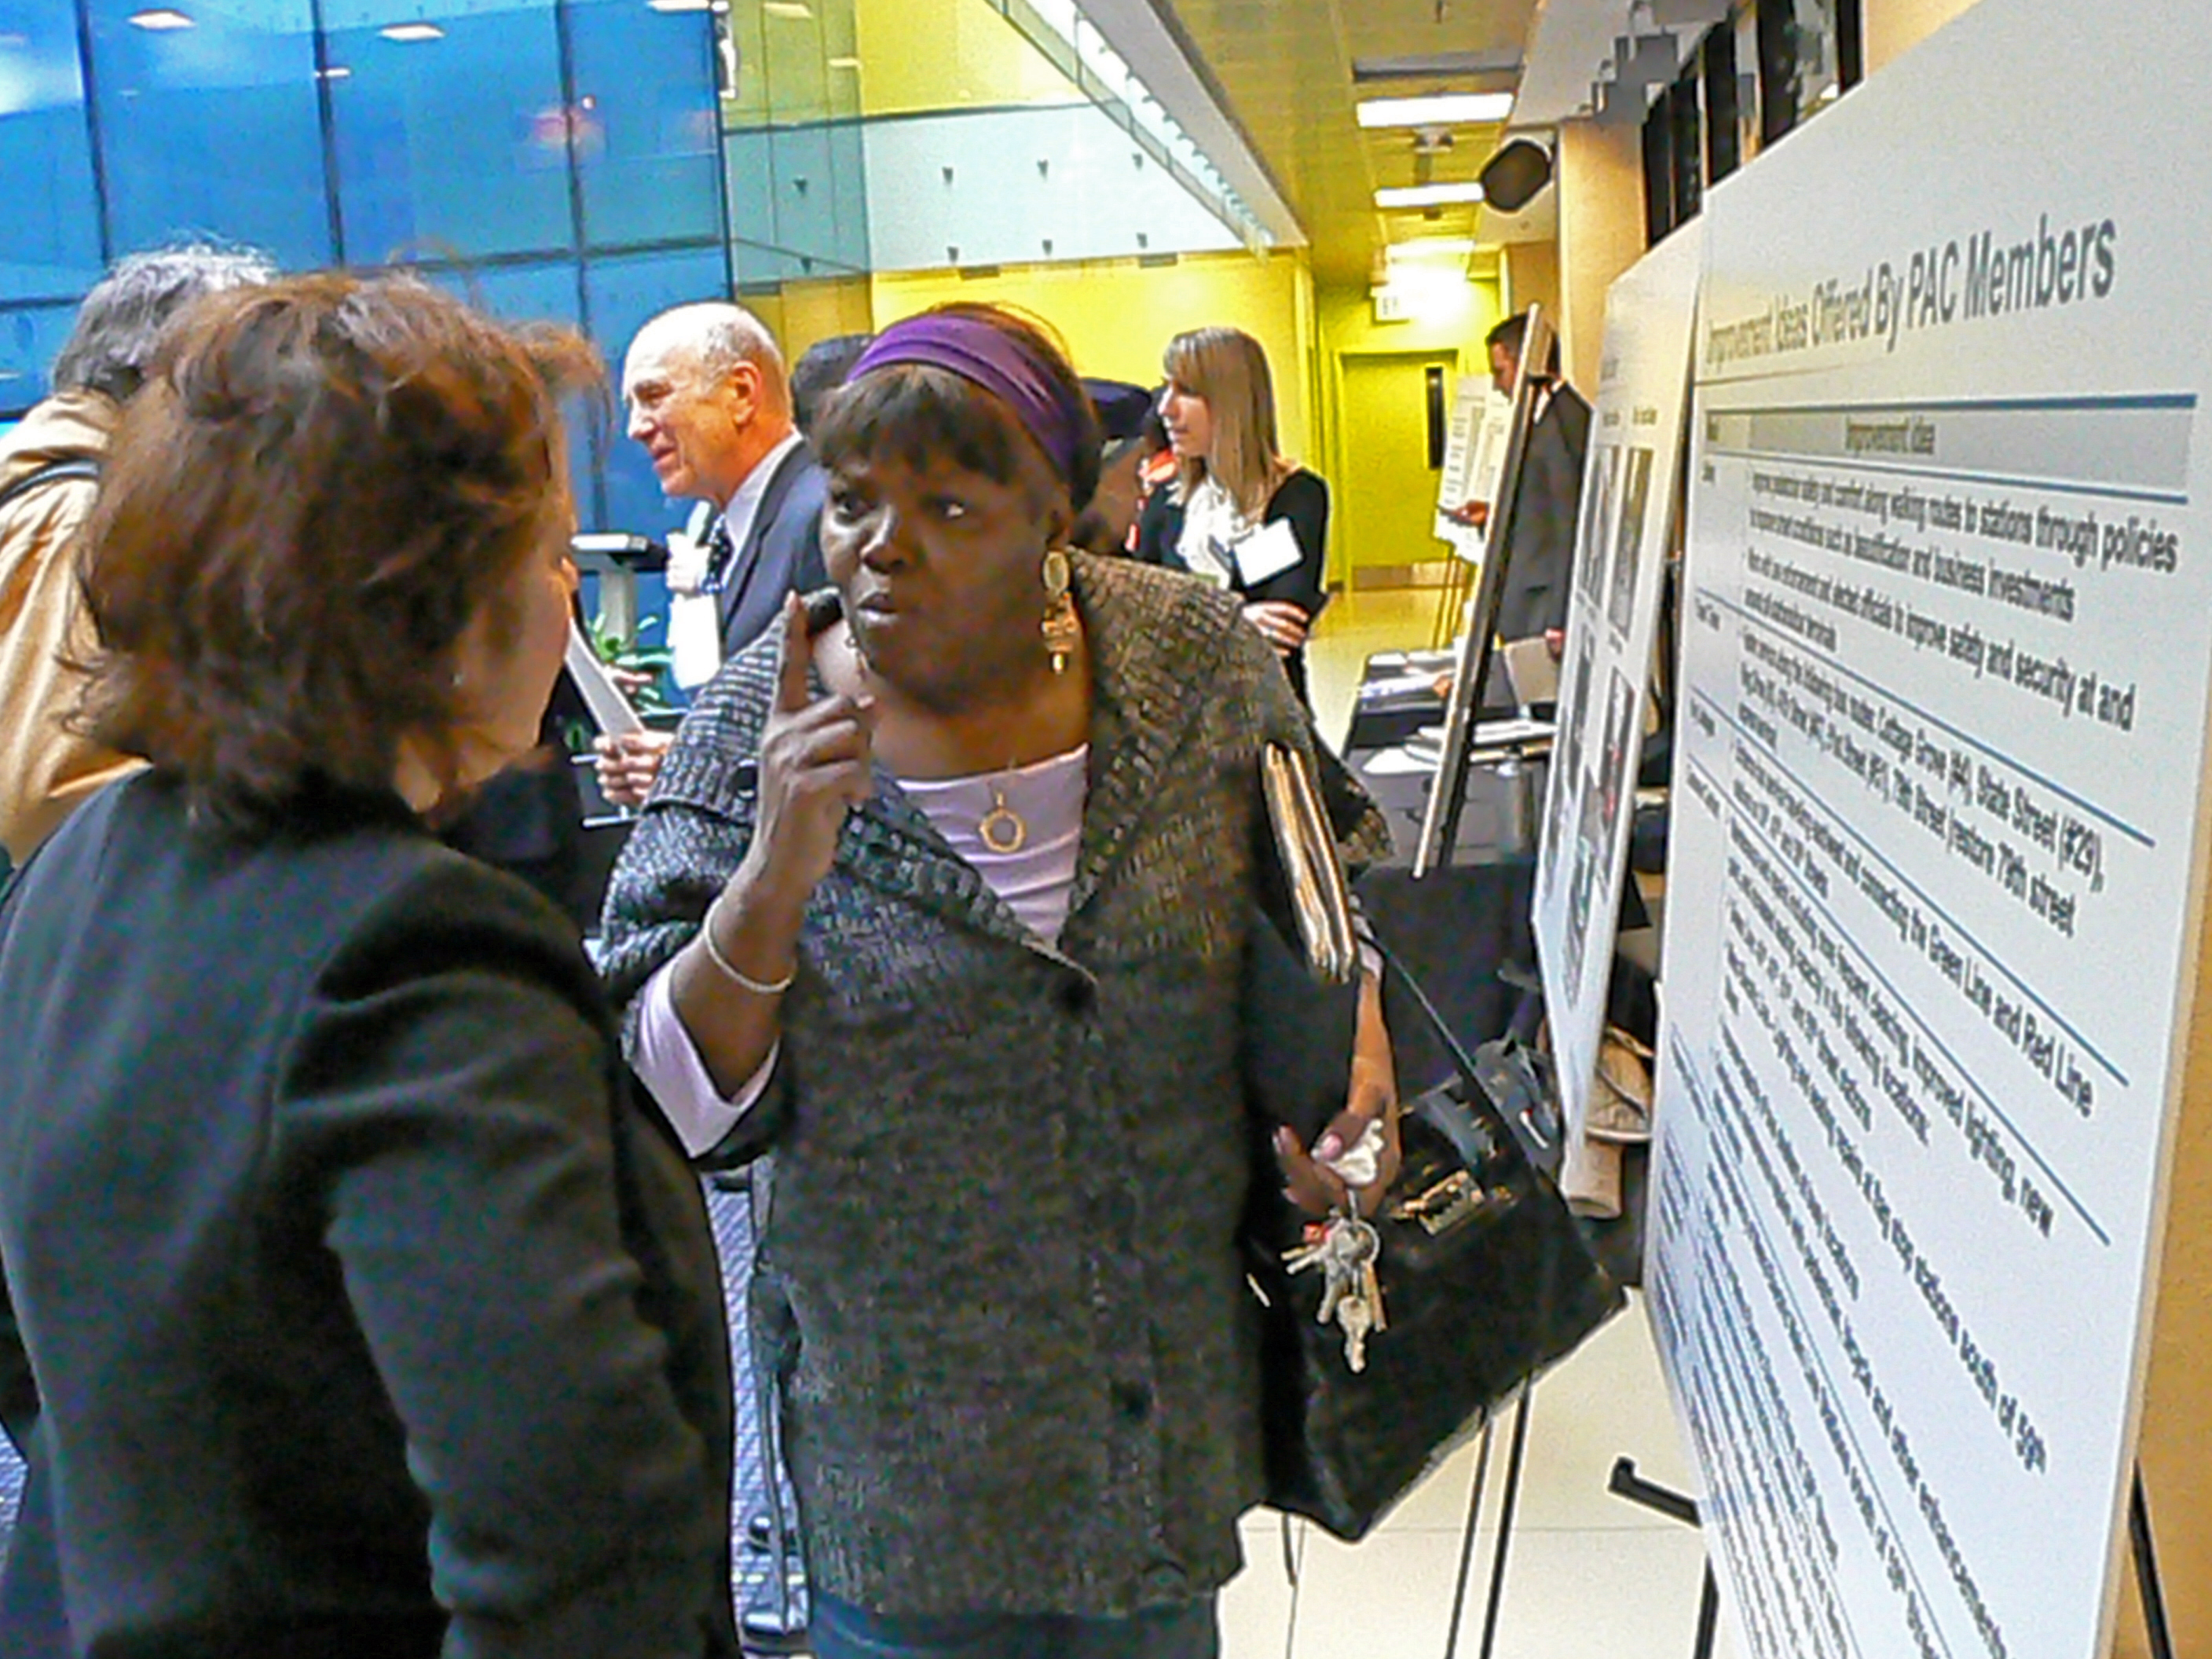 Sandra Bevins, executive director of the 51st Street Business Association, discusses transit improvements ideas, during a meeting hosted by Chicago Department of Transportation.